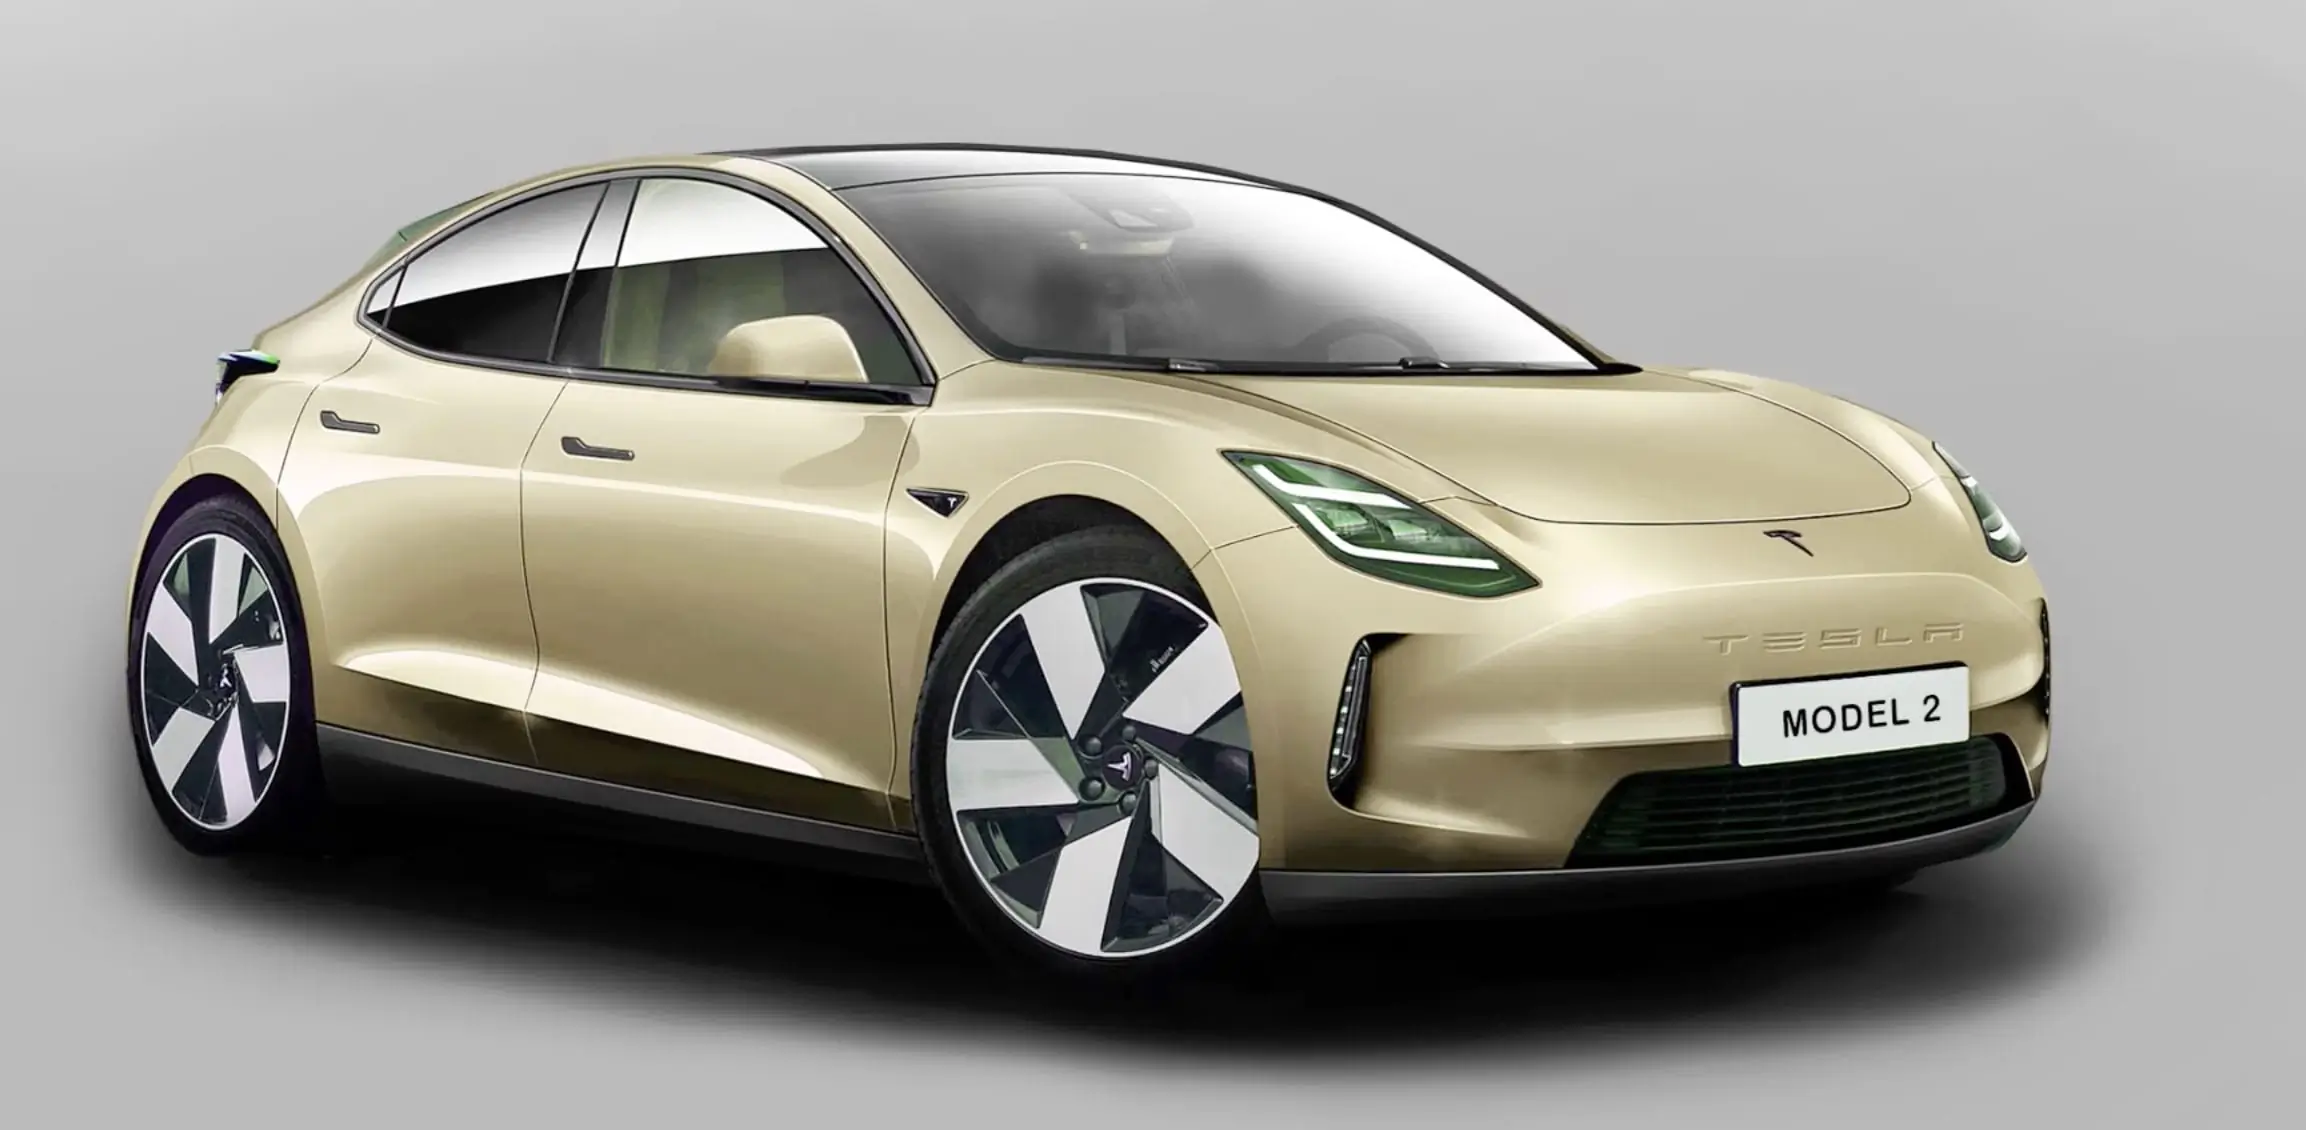 A new Tesla electric vehicle aimed against the VW ID.